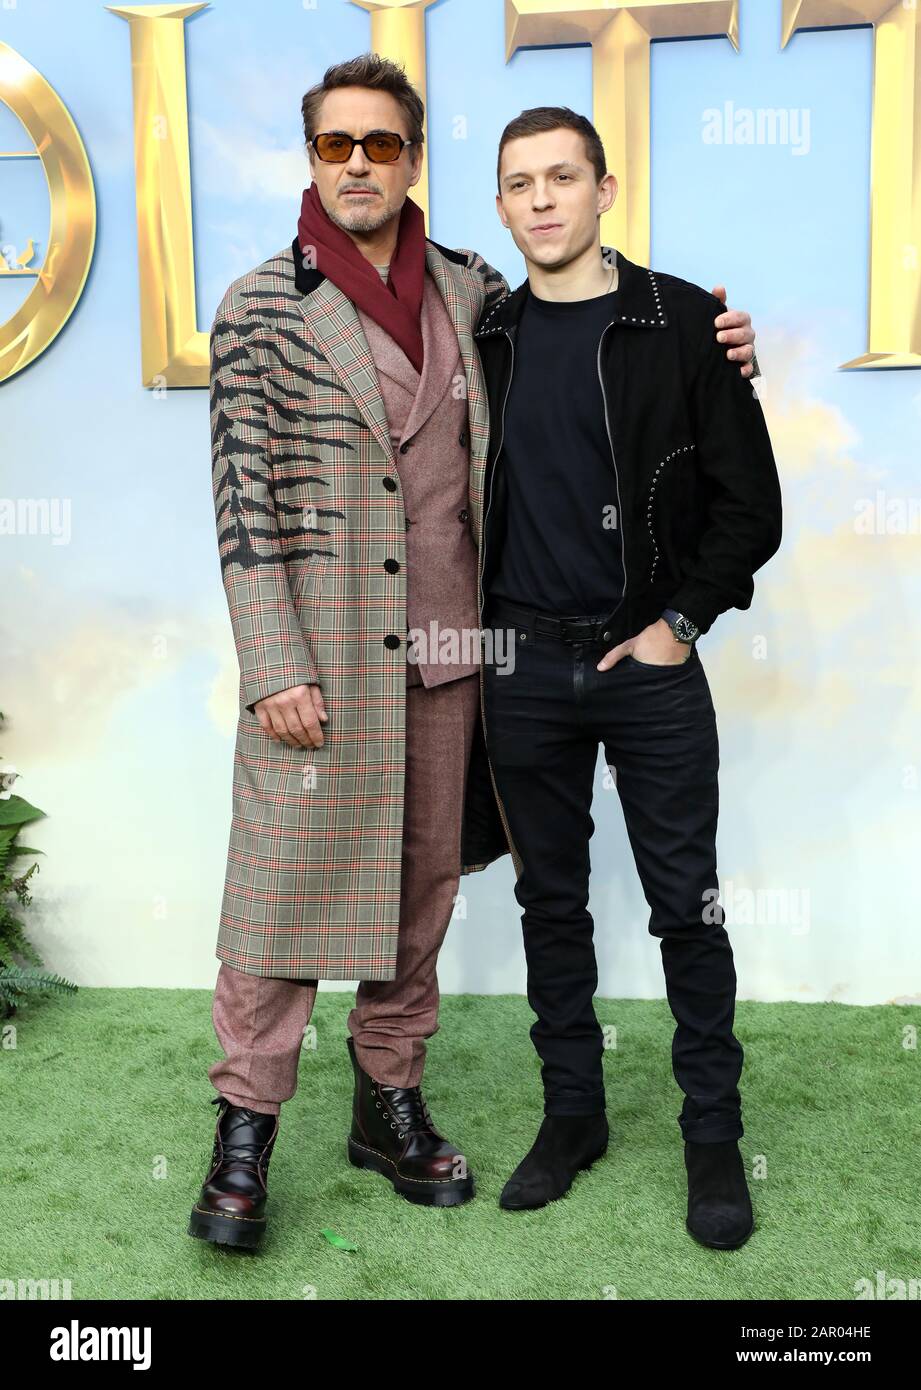 Robert Downey, Jr. (left) Tom Holland during Dolittle premiere at Leicester Square, London. Stock Photo